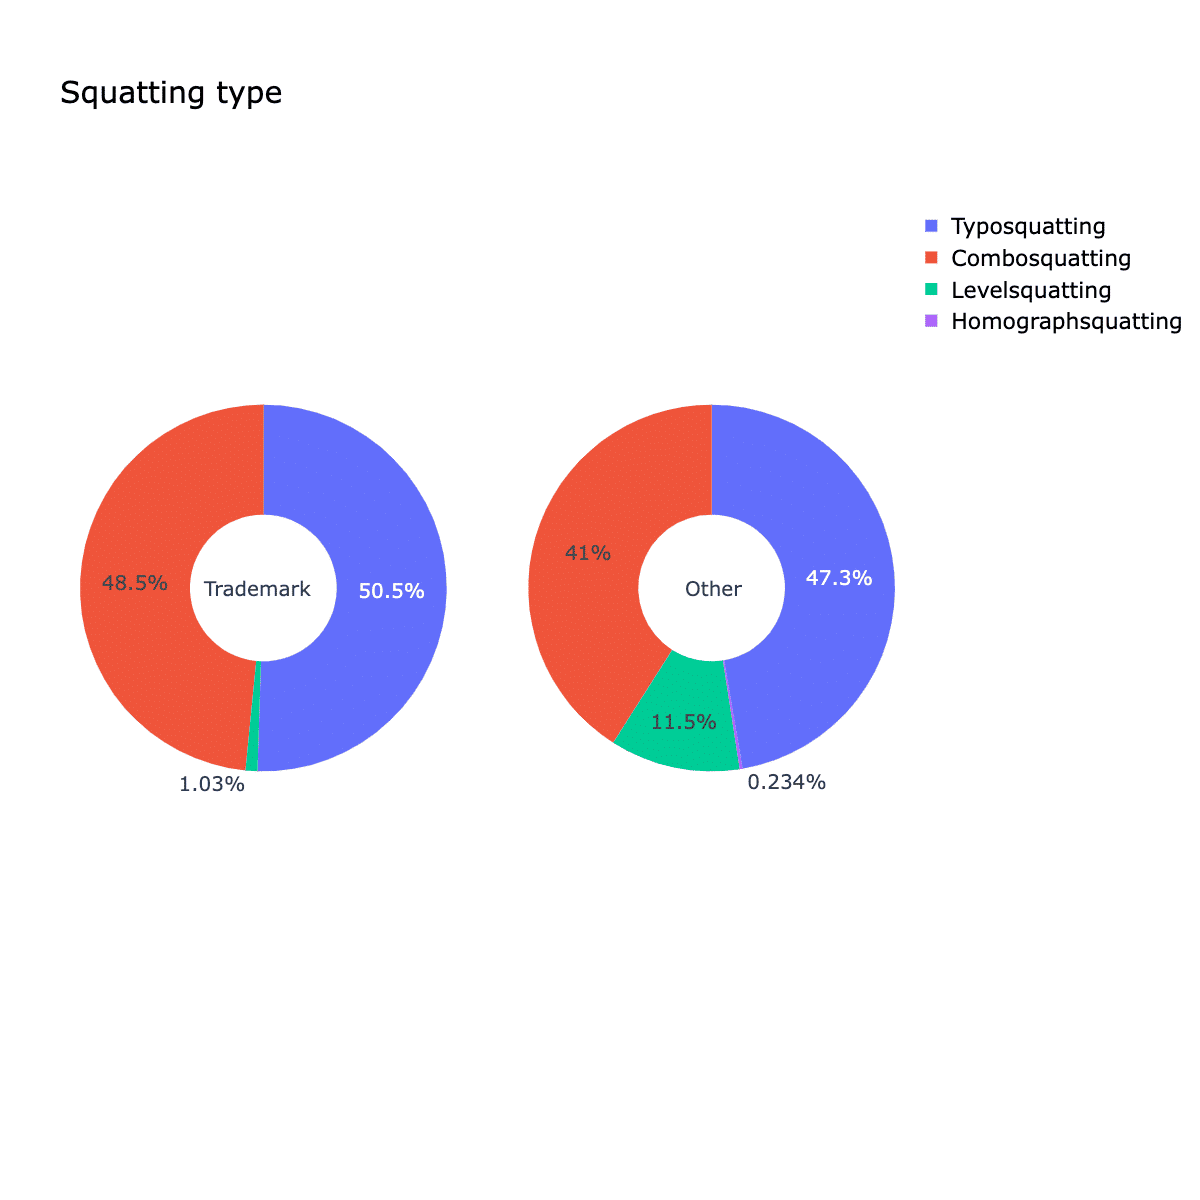 Distribution of squatting techniques in domains not registered by trademark owners